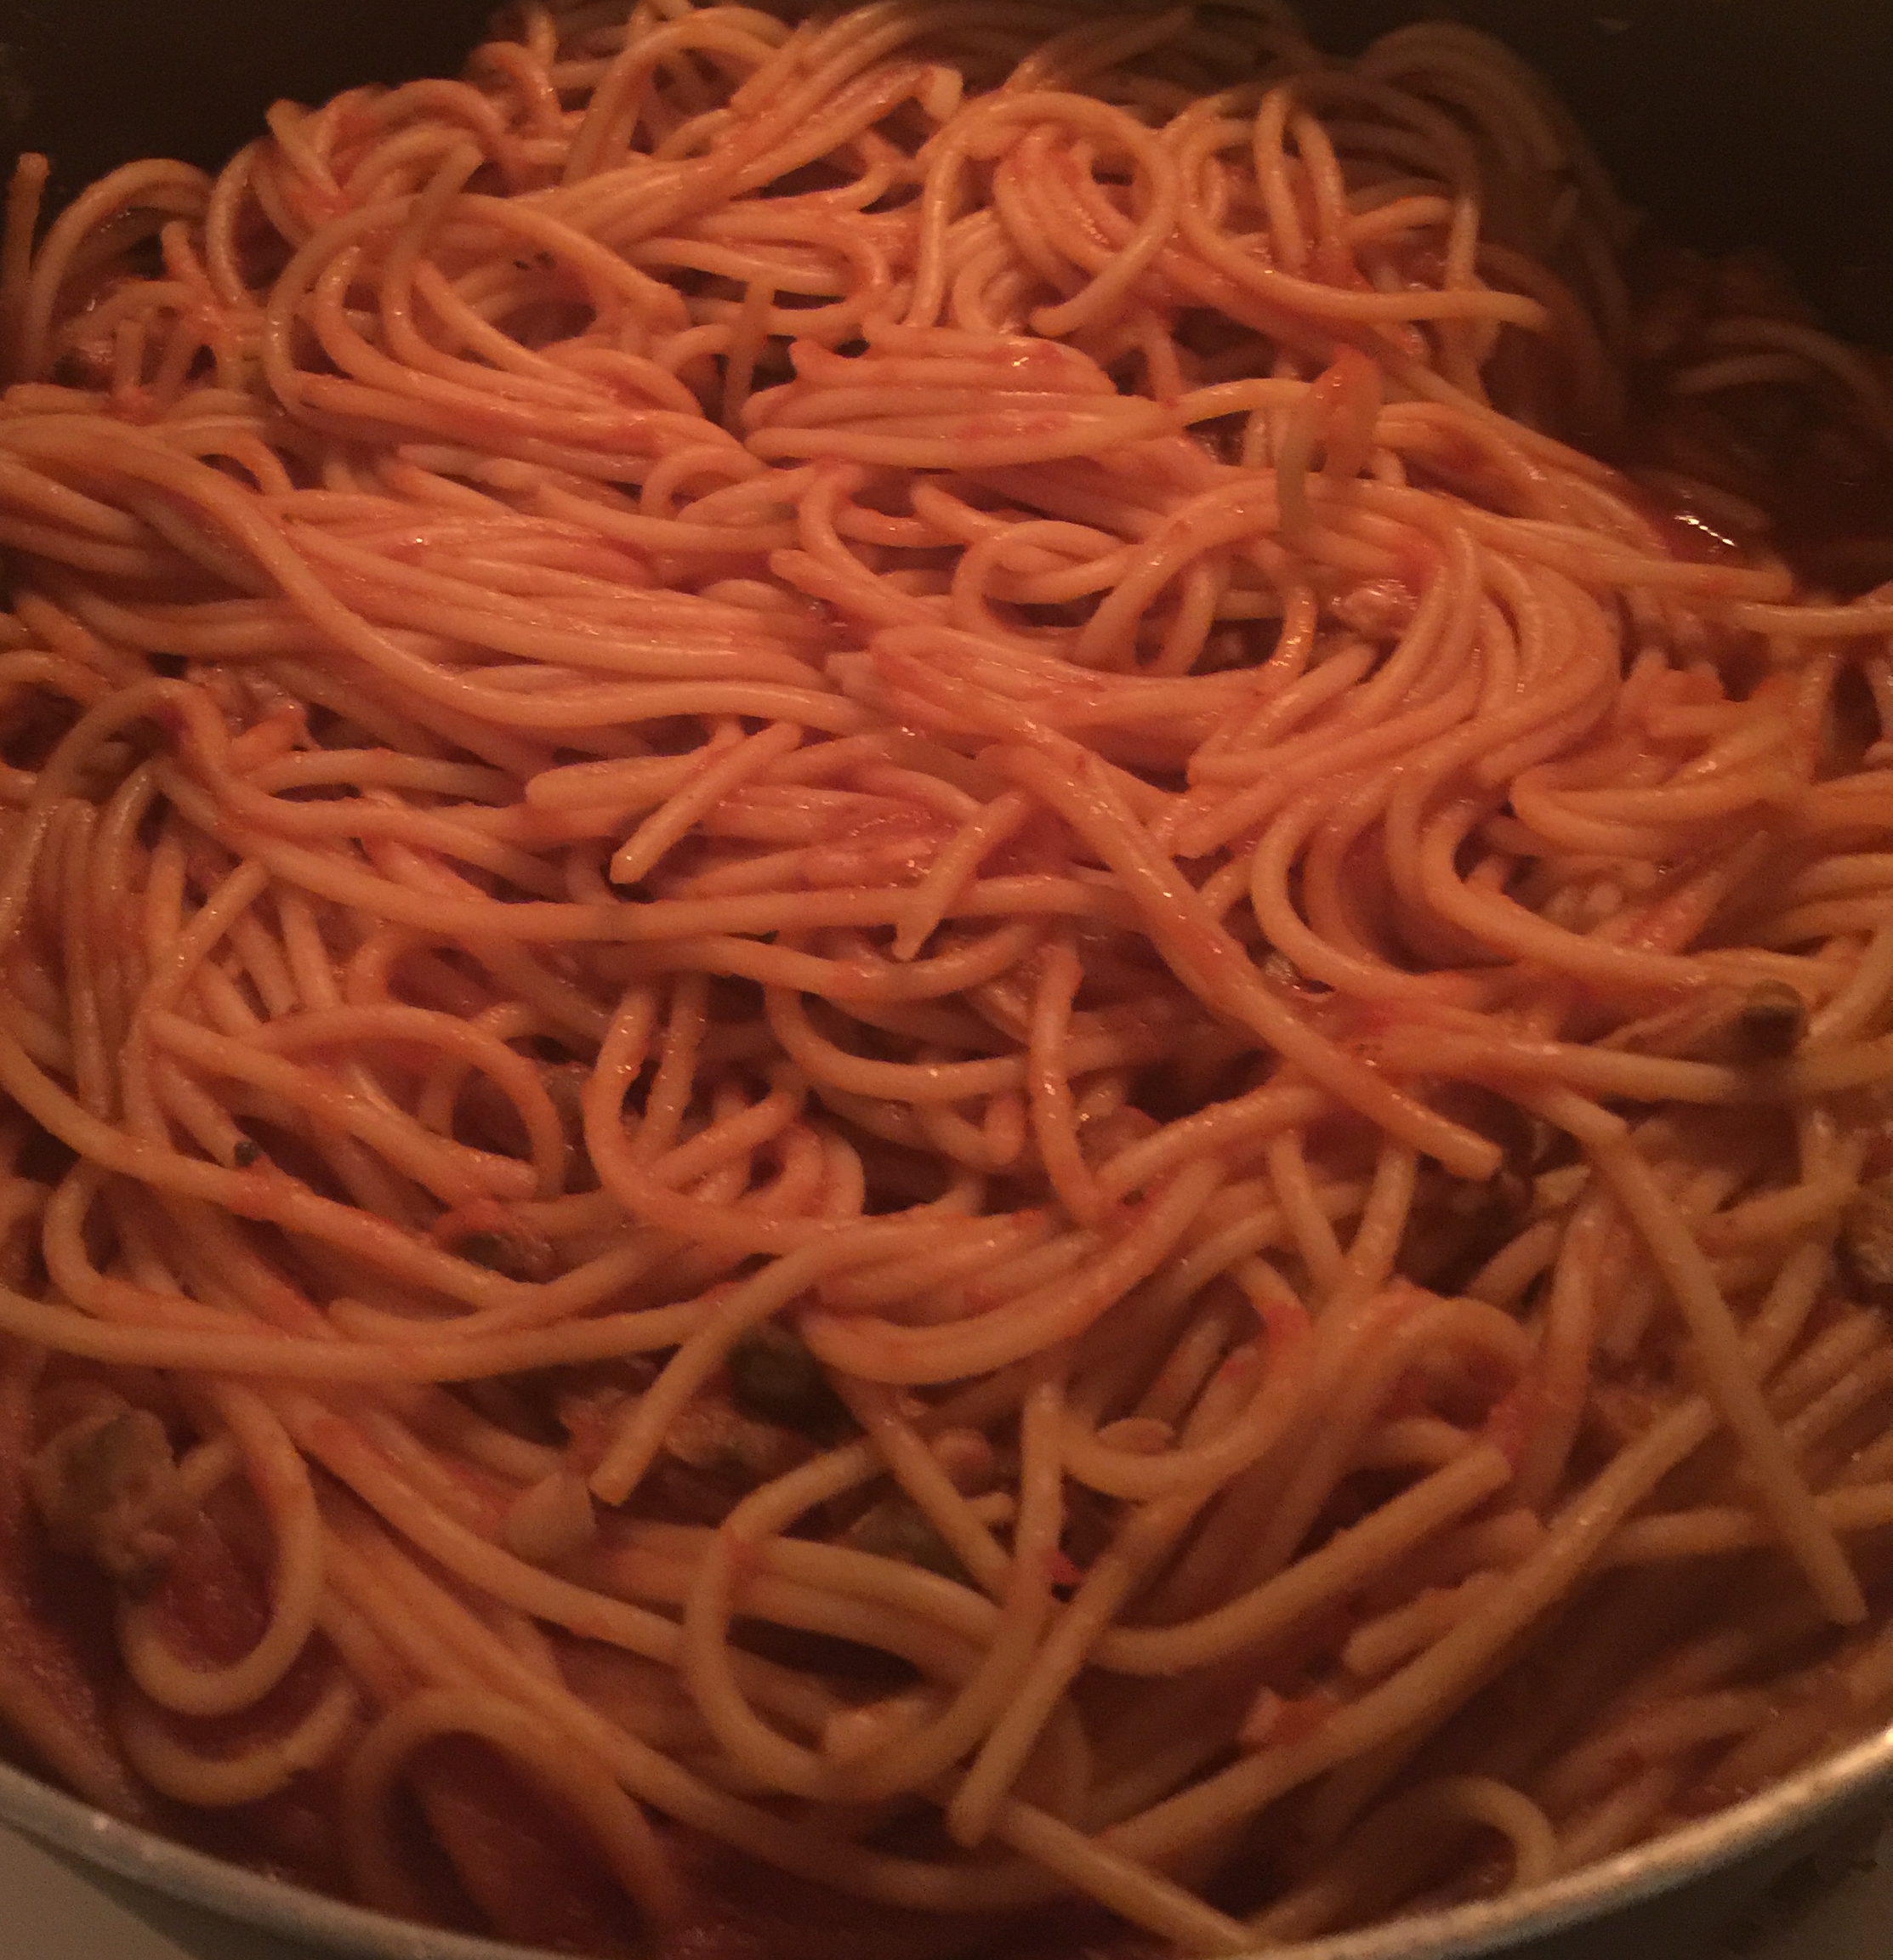 Chef John's Spaghetti with Red Clam Sauce 